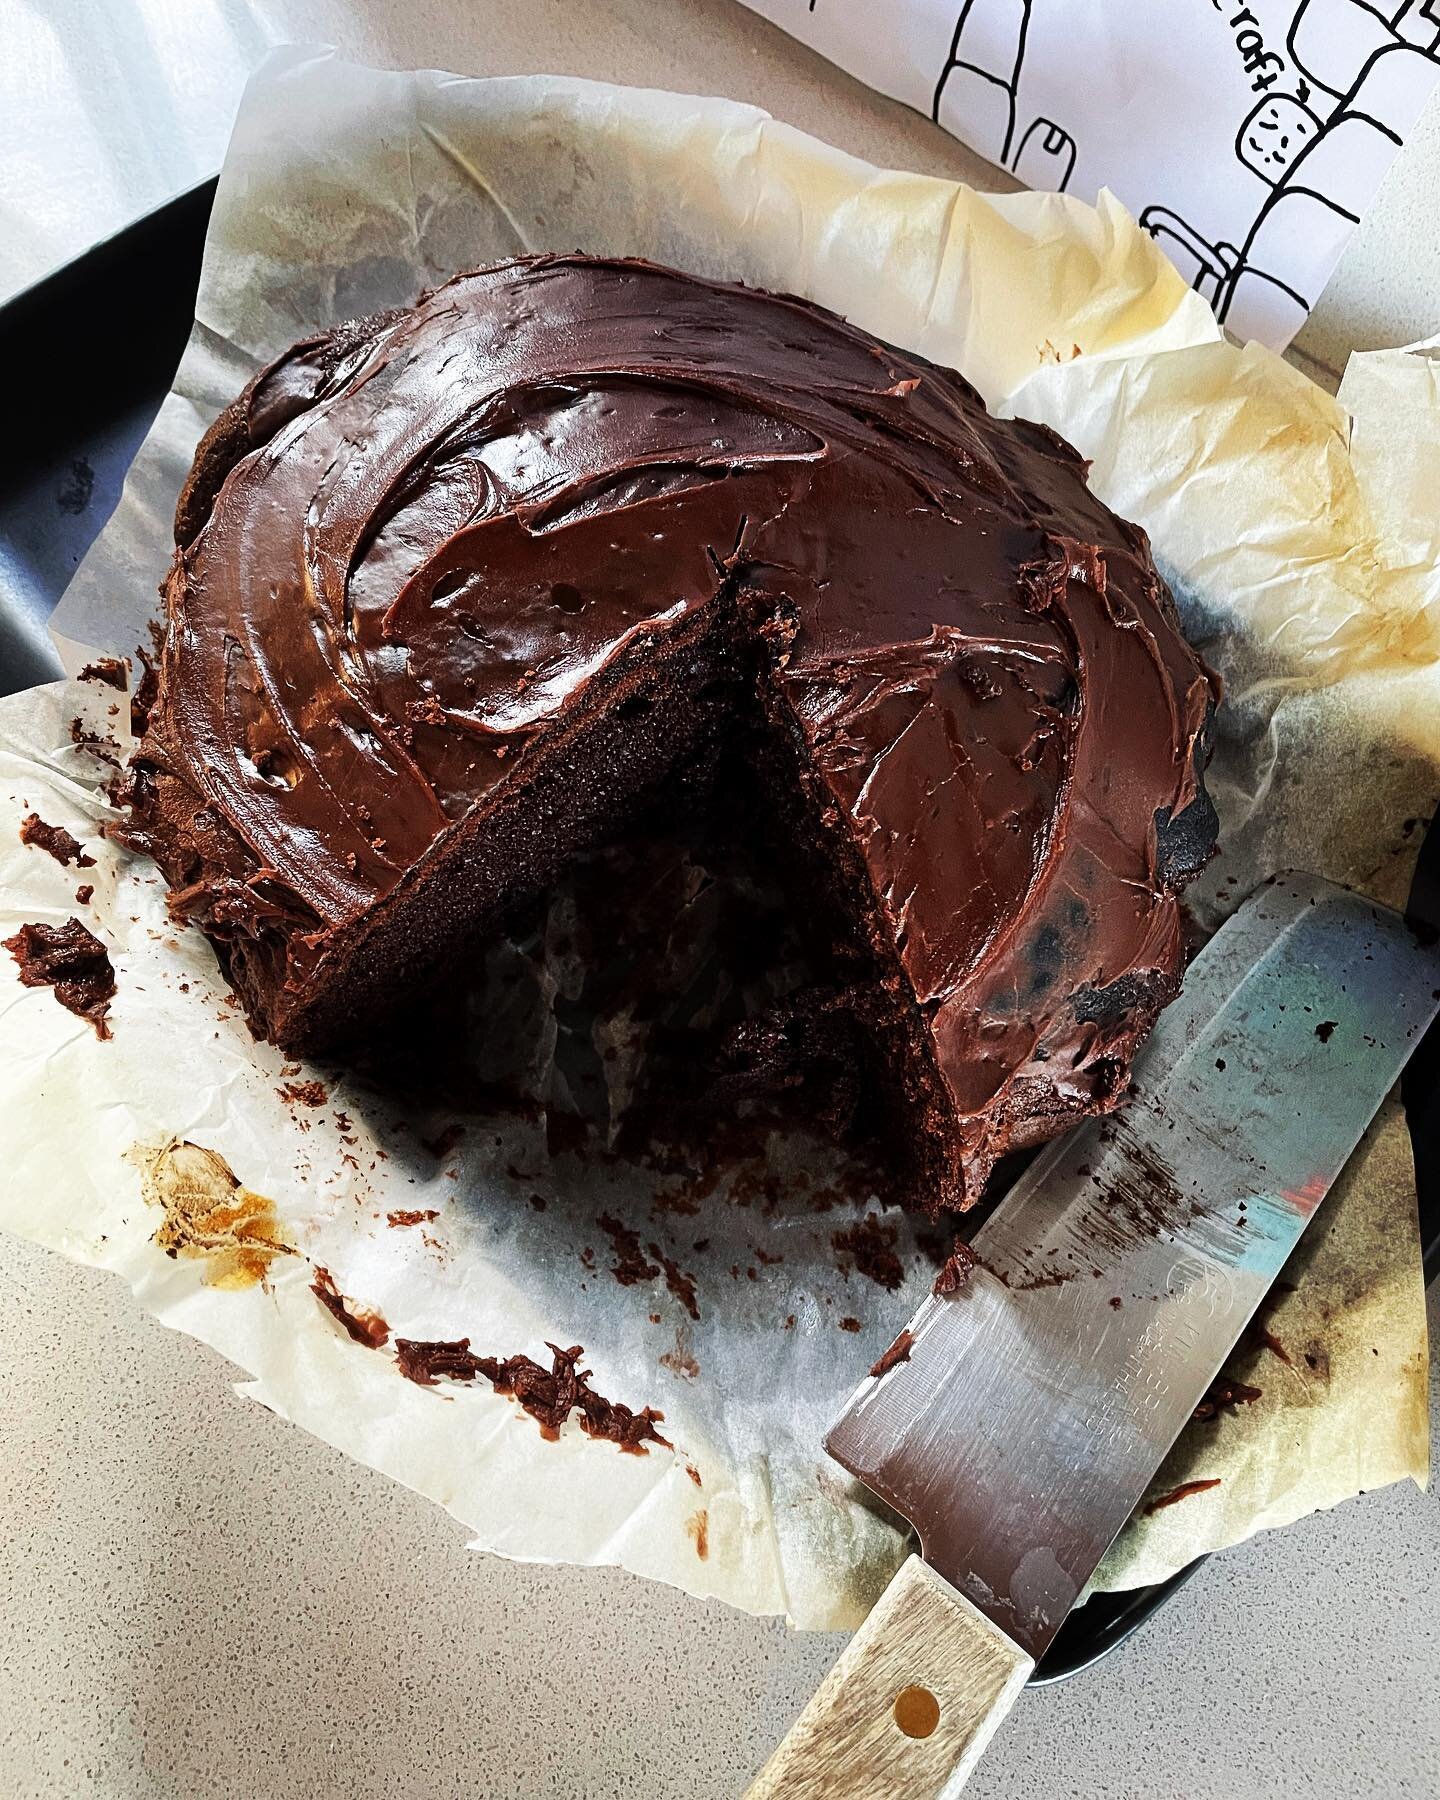 I&rsquo;ve spent my entire life terrified of Miss Trunchbull. 

Today I made this cake for the kids I&rsquo;m looking after. 

Turns out, I AM Miss Trunchbull. 

I&rsquo;m sorry Little Brucey. 

&ldquo;You wanted cake, you got cake, now EAT IT&rdquo;